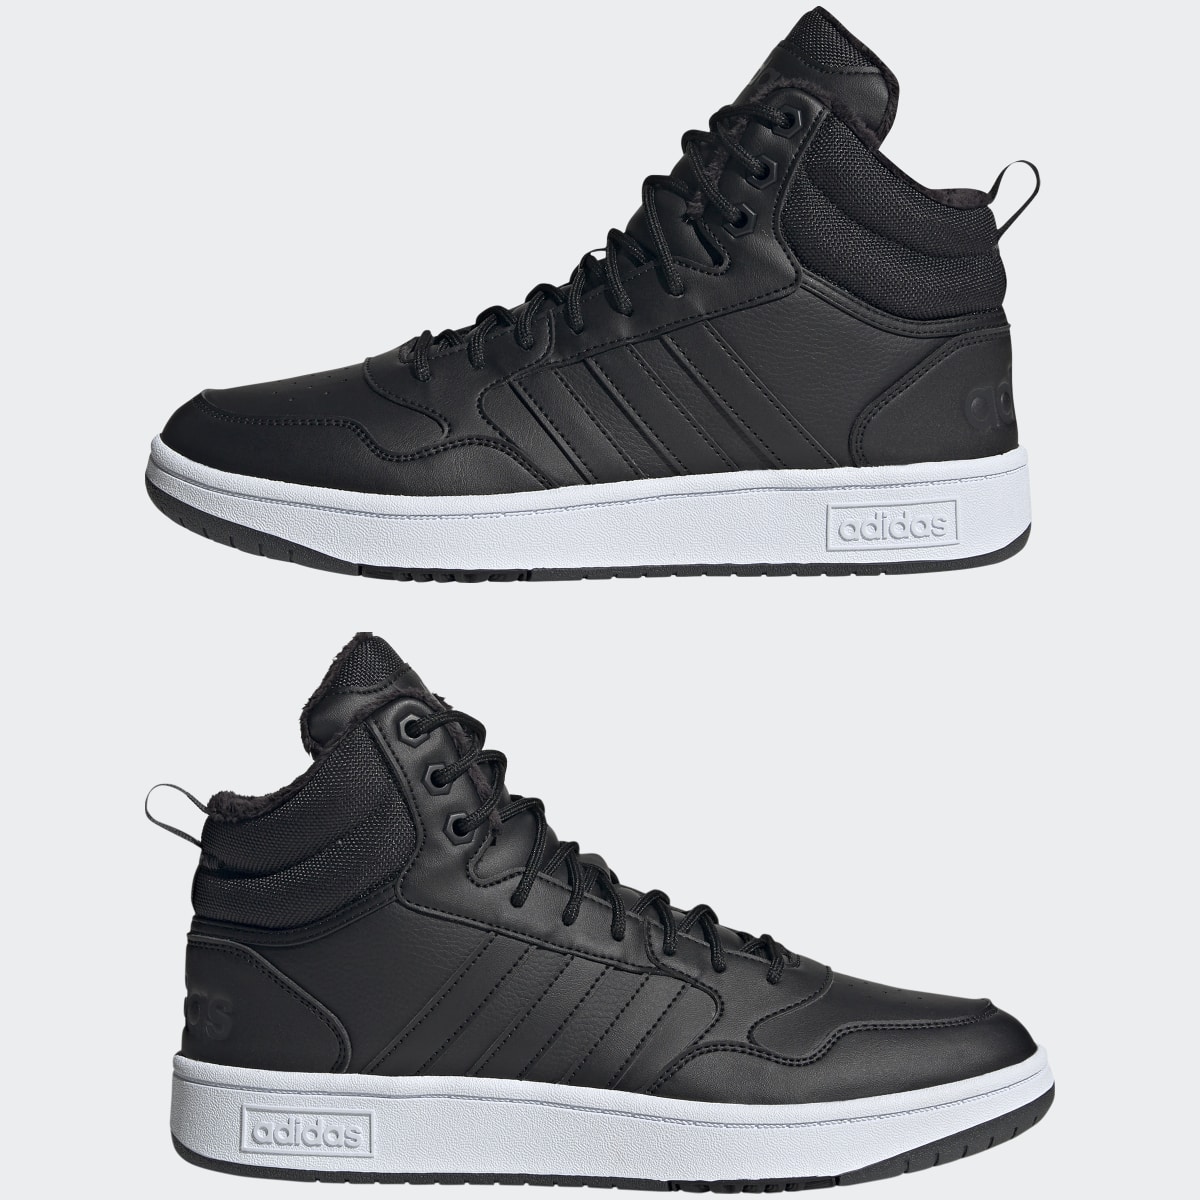 Adidas Hoops 3.0 Mid Lifestyle Basketball Classic Fur Lining Winterized Schuh. 8